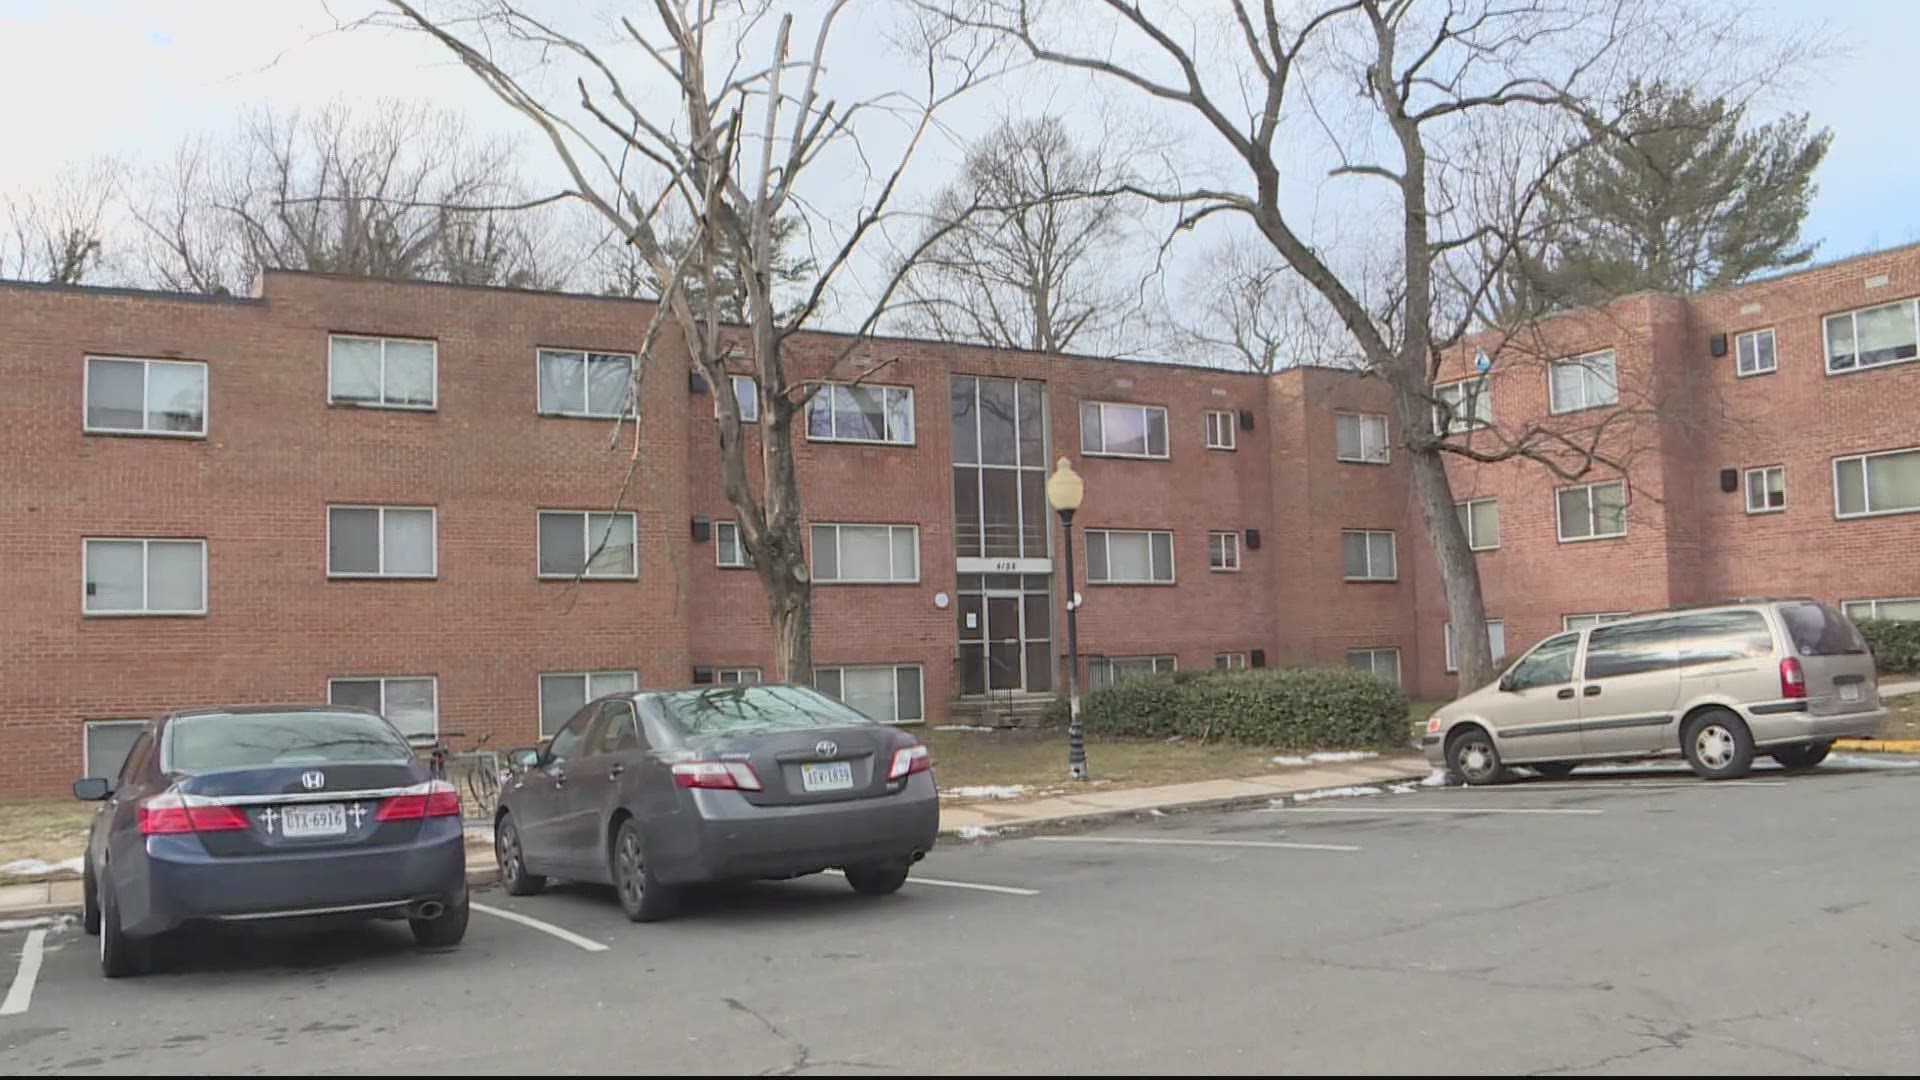 Fairfax County police say detectives are searching for a group of suspects that shot at the two outside an apartment building Friday night.